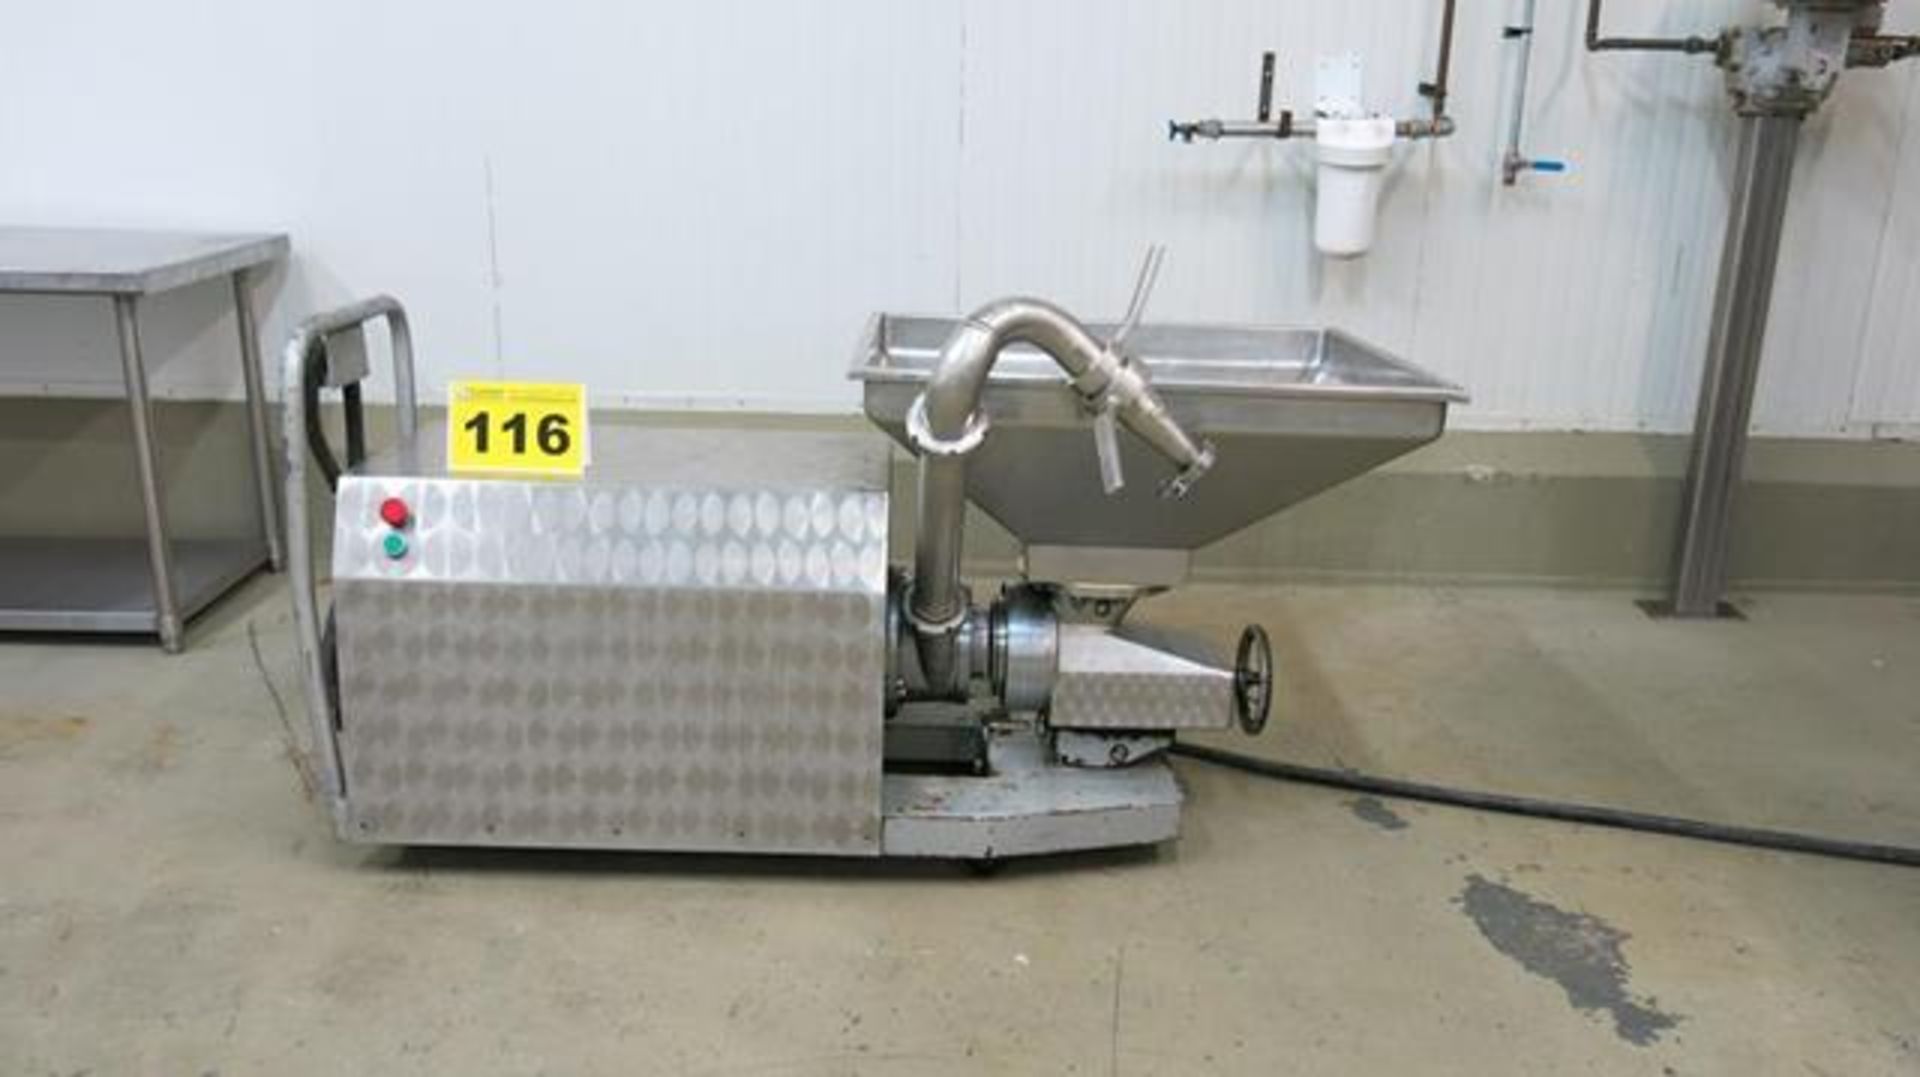 PROBST & CLASS, PUC-N160L50, STAINLESS STEEL, COILED MILL, 34" X 31", HOPPER, S/N 80077, 37KW,